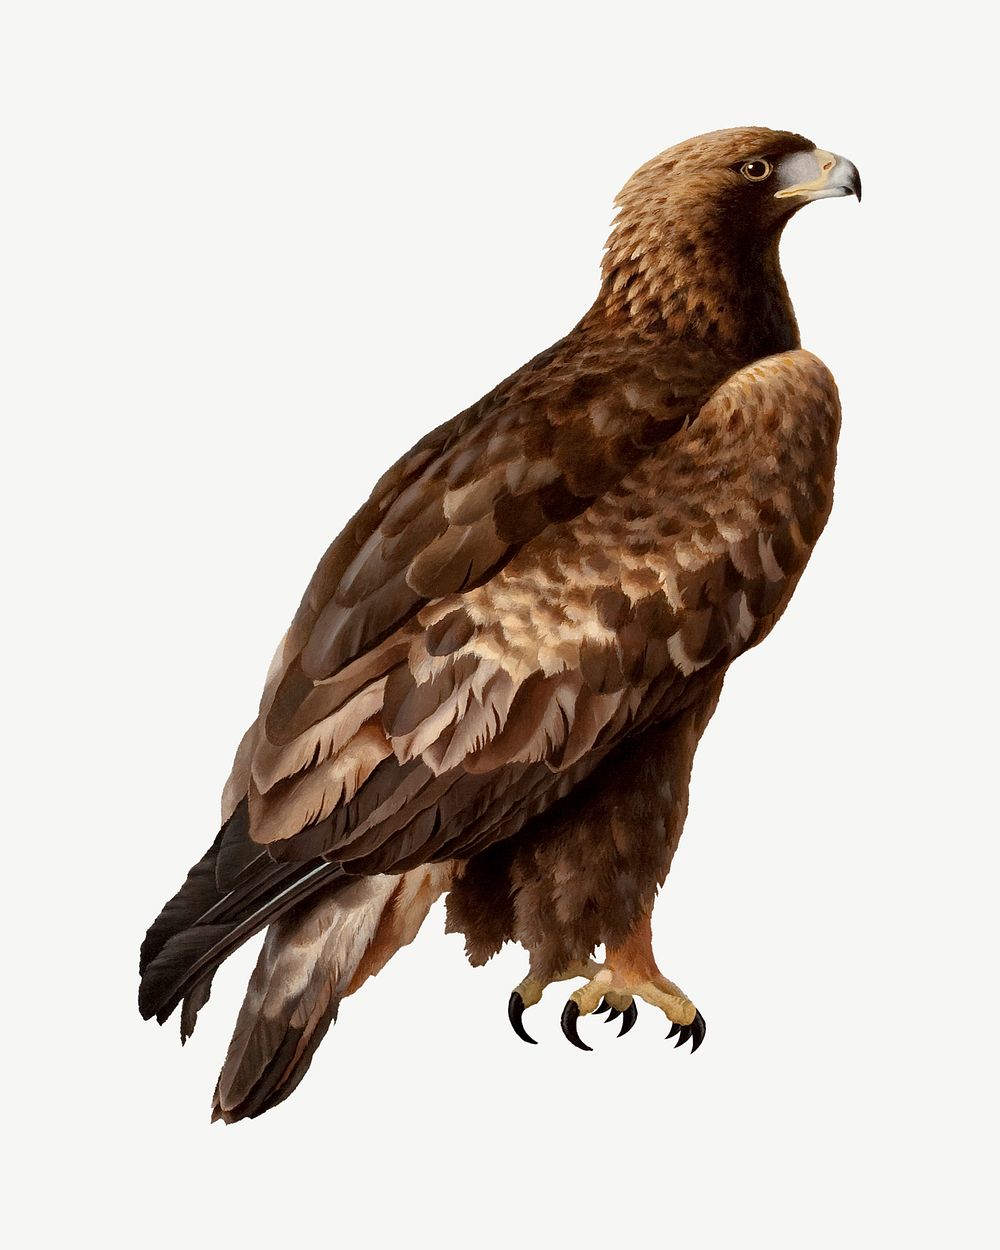 Golden eagle, wildlife illustration psd. Remixed by rawpixel.